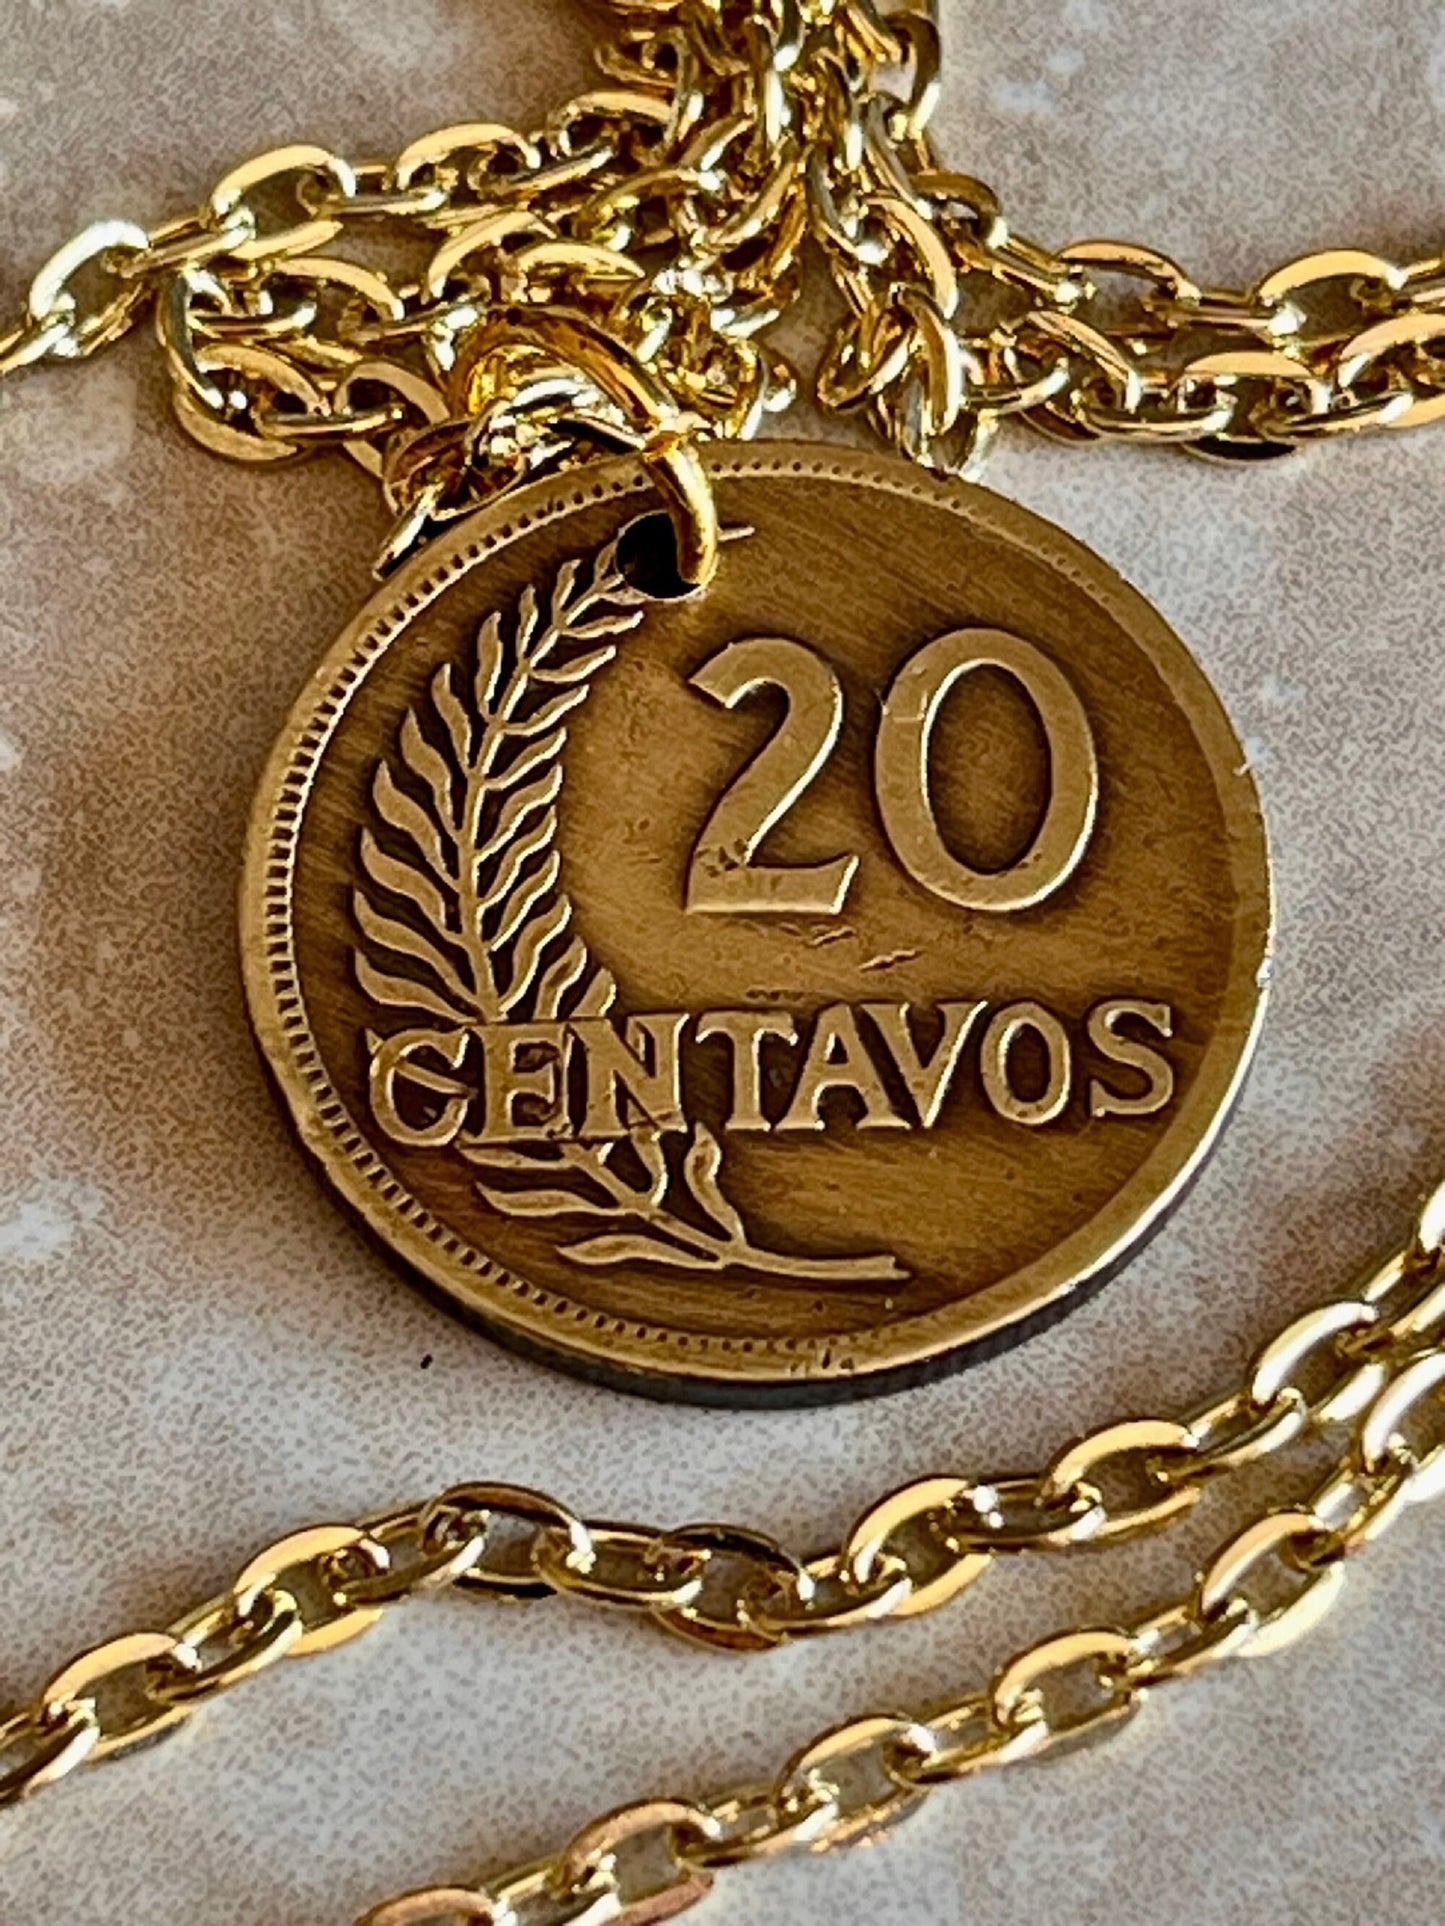 Peru Coin Pendant Peruvian 20 Centavos Personal Necklace Old Vintage Handmade Jewelry Gift Friend Charm For Him Her World Coin Collector